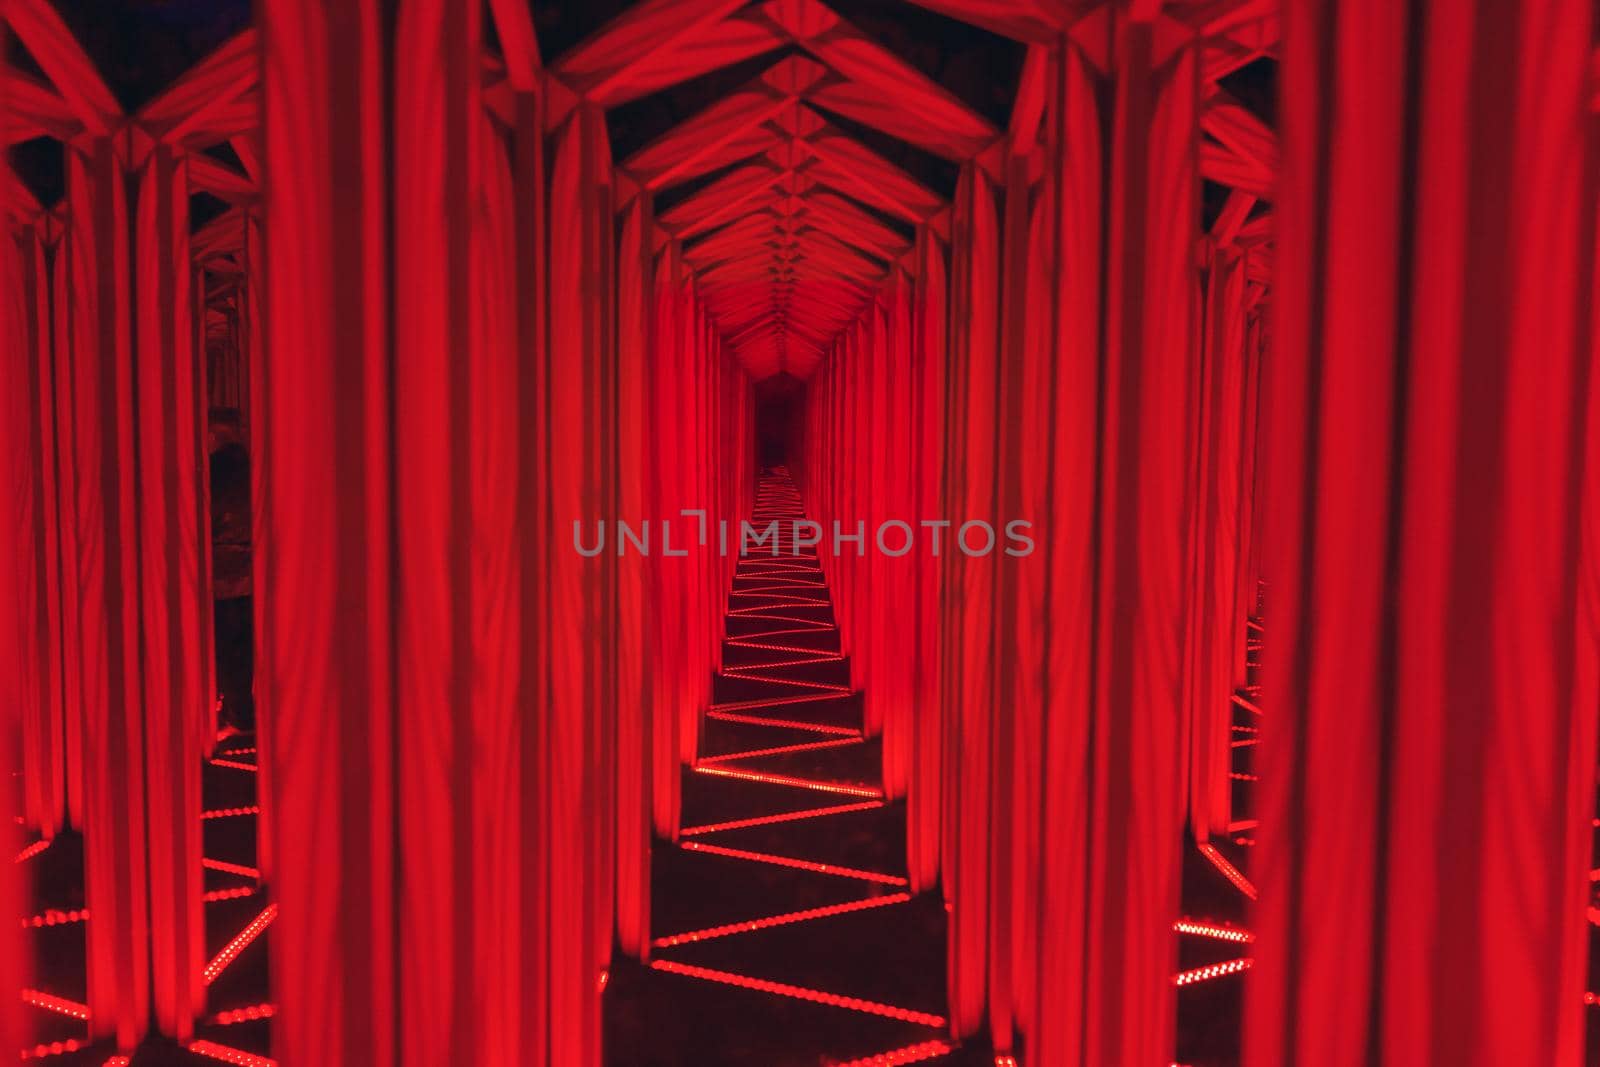 labyrinth mirror maze with red illumination by nikkytok